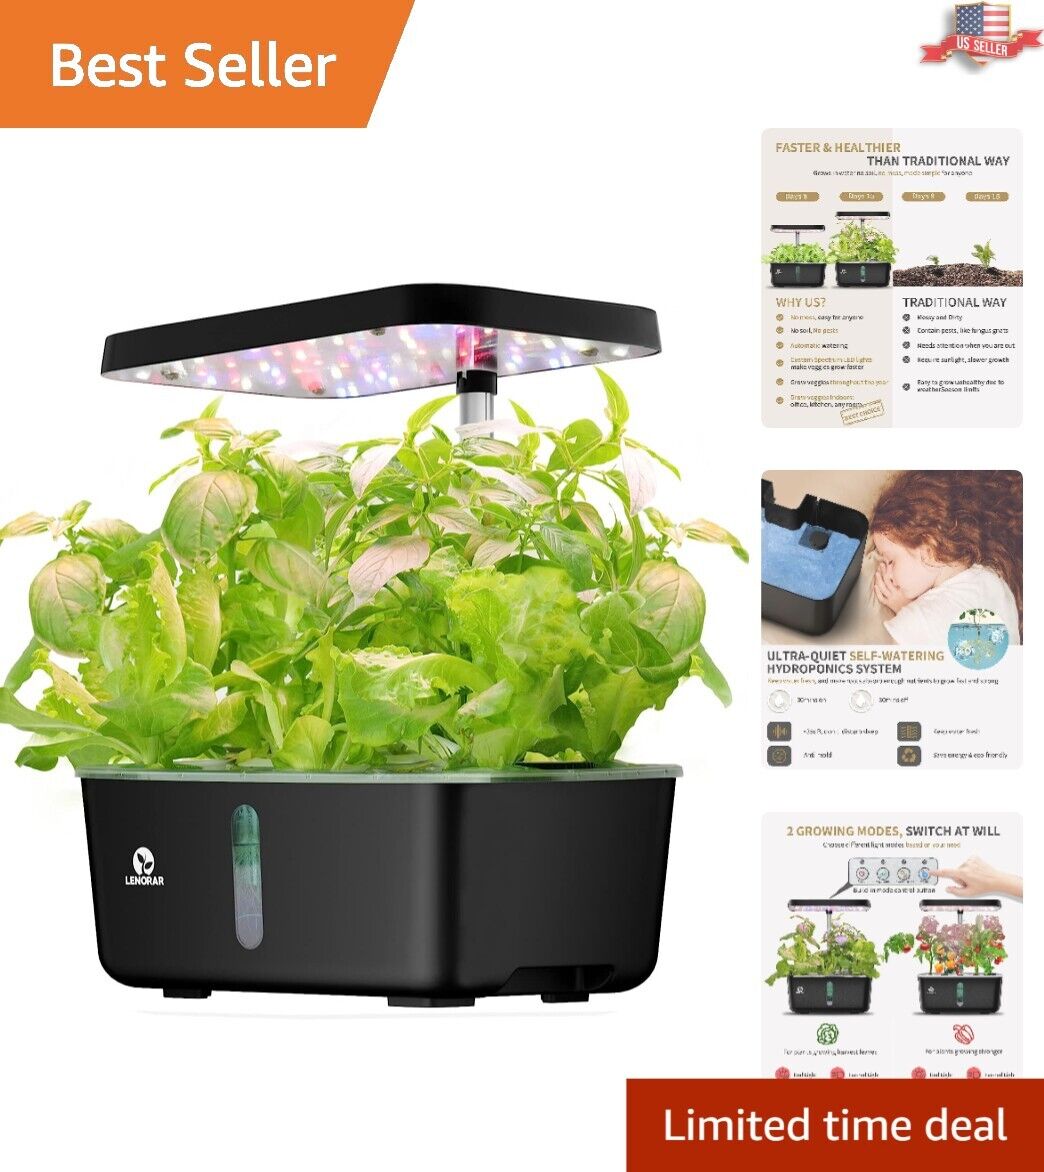 Easy Hydroponics System: 8 Pods Hydroponic Garden with Spectrum LED Grow Light